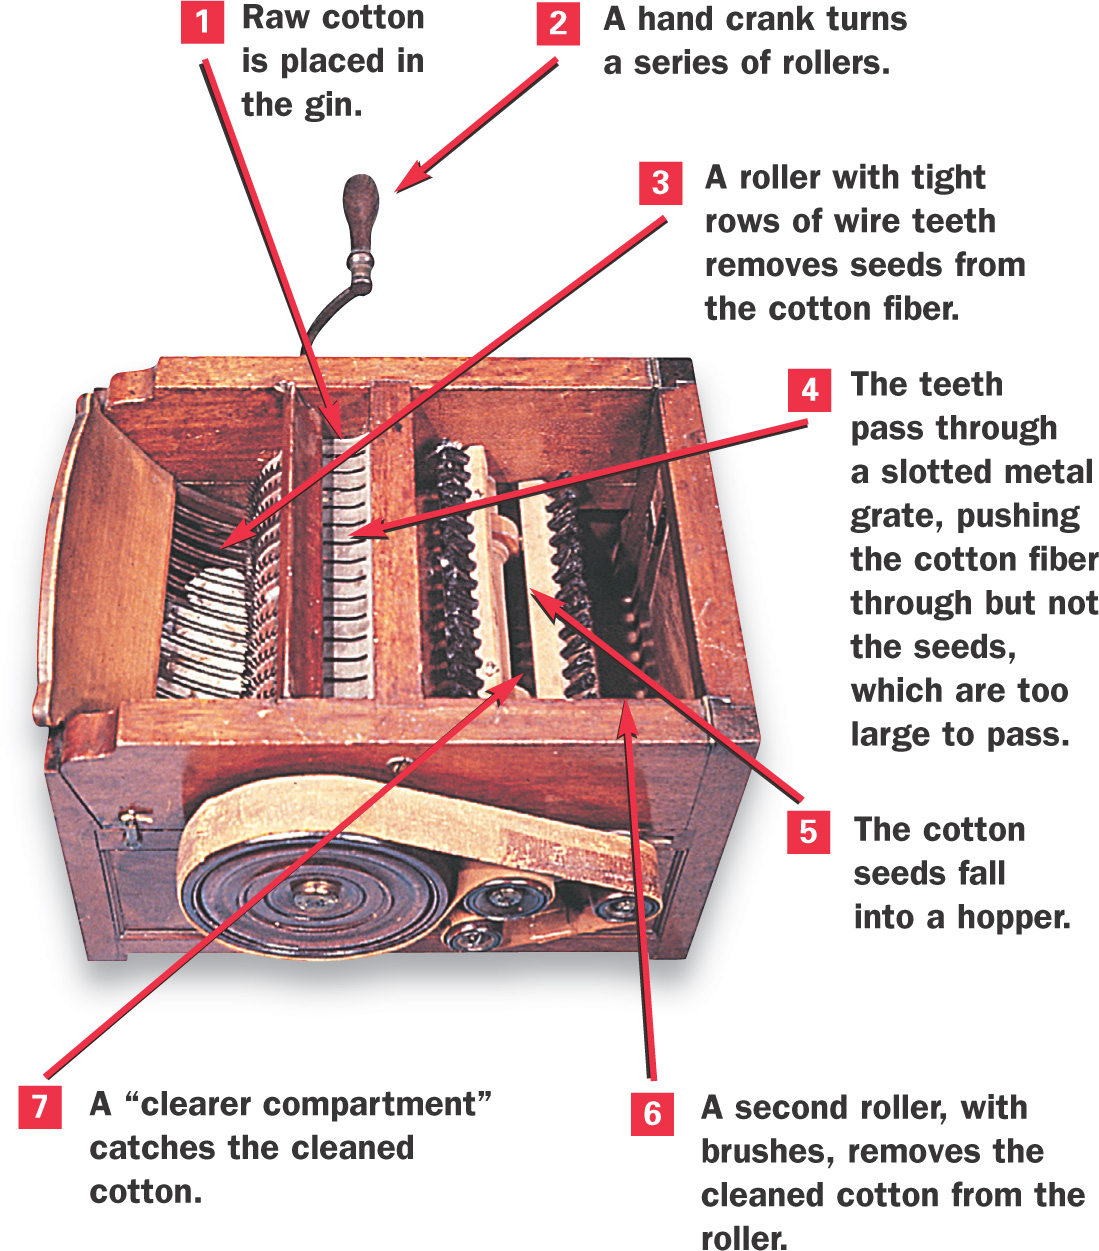 A photo shows a cotton gin, a wooden box with a handcrank on the outside and wire teeth on the inside. The labels explain how it works.